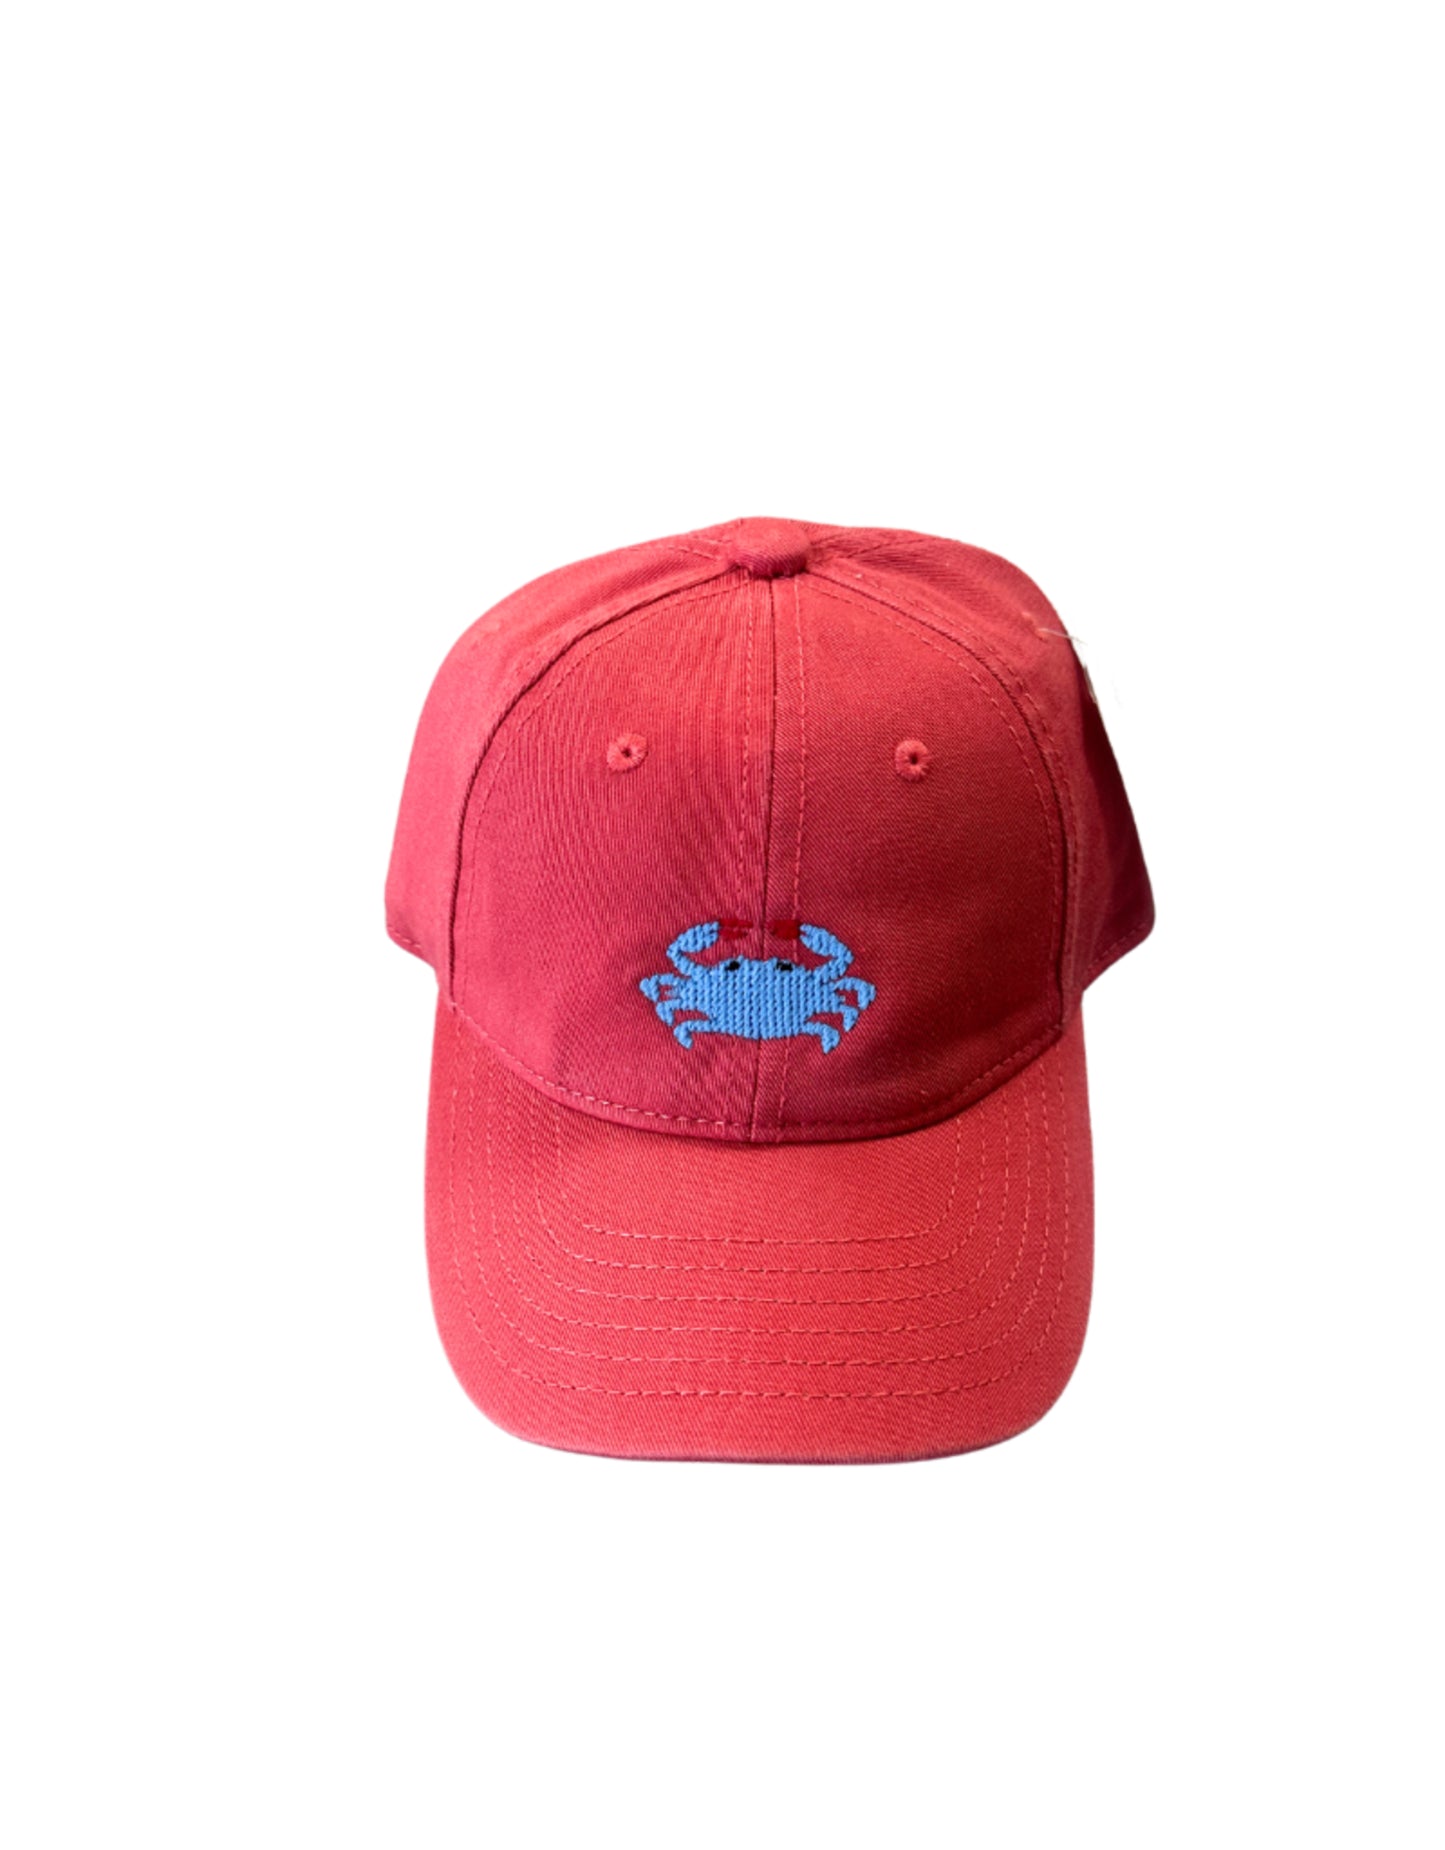 Kids Blue Crab Hat - New England Red